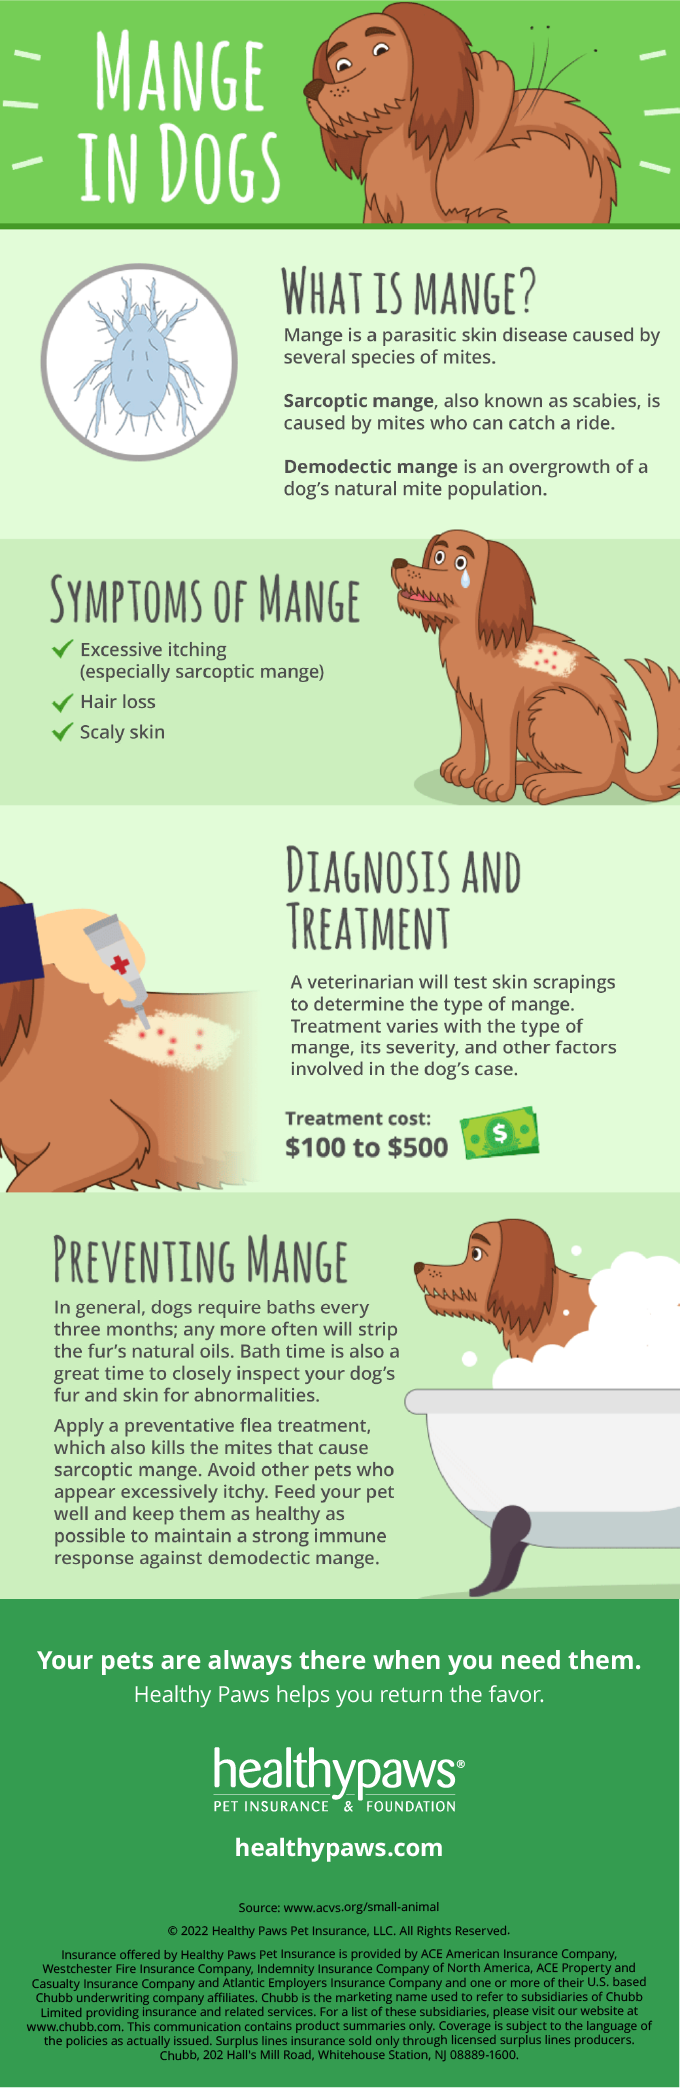 is mange in dogs contagious to humans